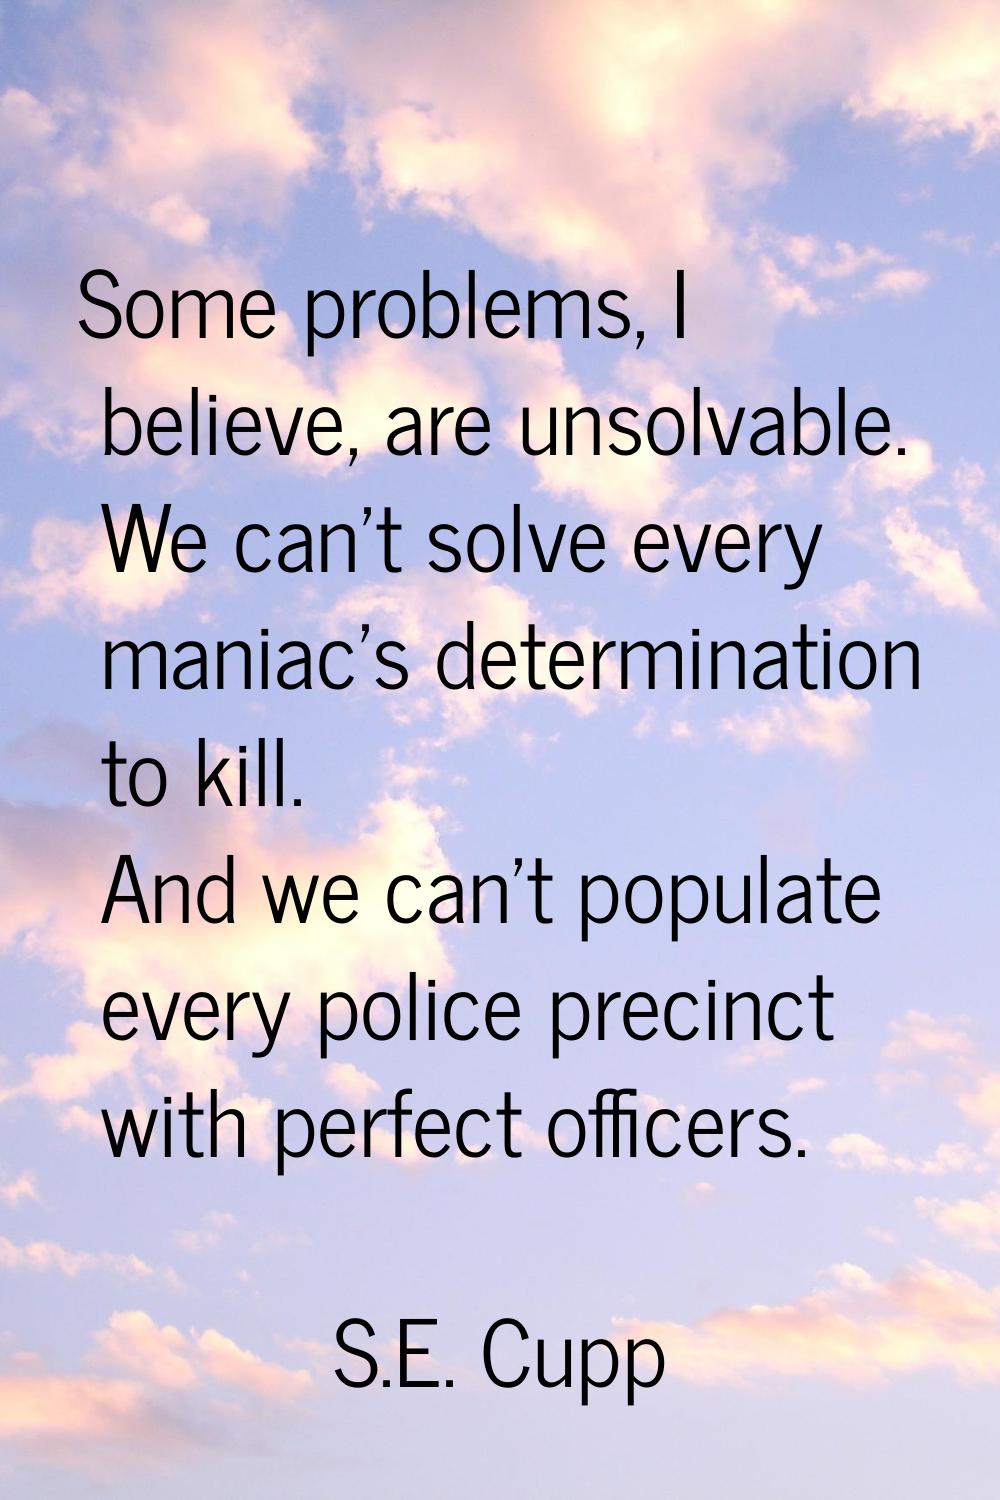 Some problems, I believe, are unsolvable. We can't solve every maniac's determination to kill. And 